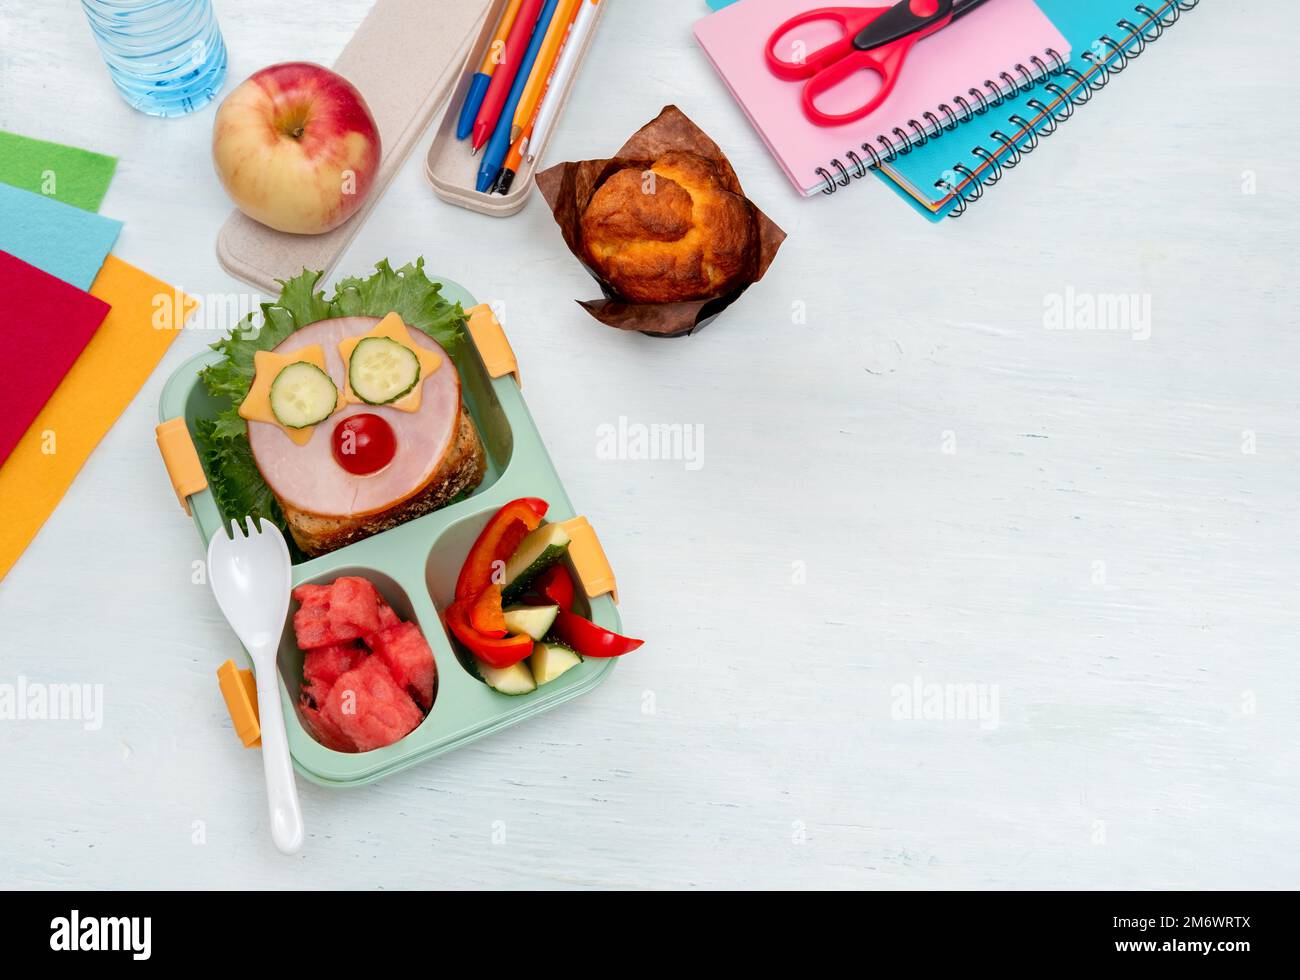 https://c8.alamy.com/comp/2M6WRTX/school-lunch-box-for-kids-with-food-in-the-form-of-funny-faces-school-lunch-box-with-sandwich-vegetables-water-and-stationery-2M6WRTX.jpg